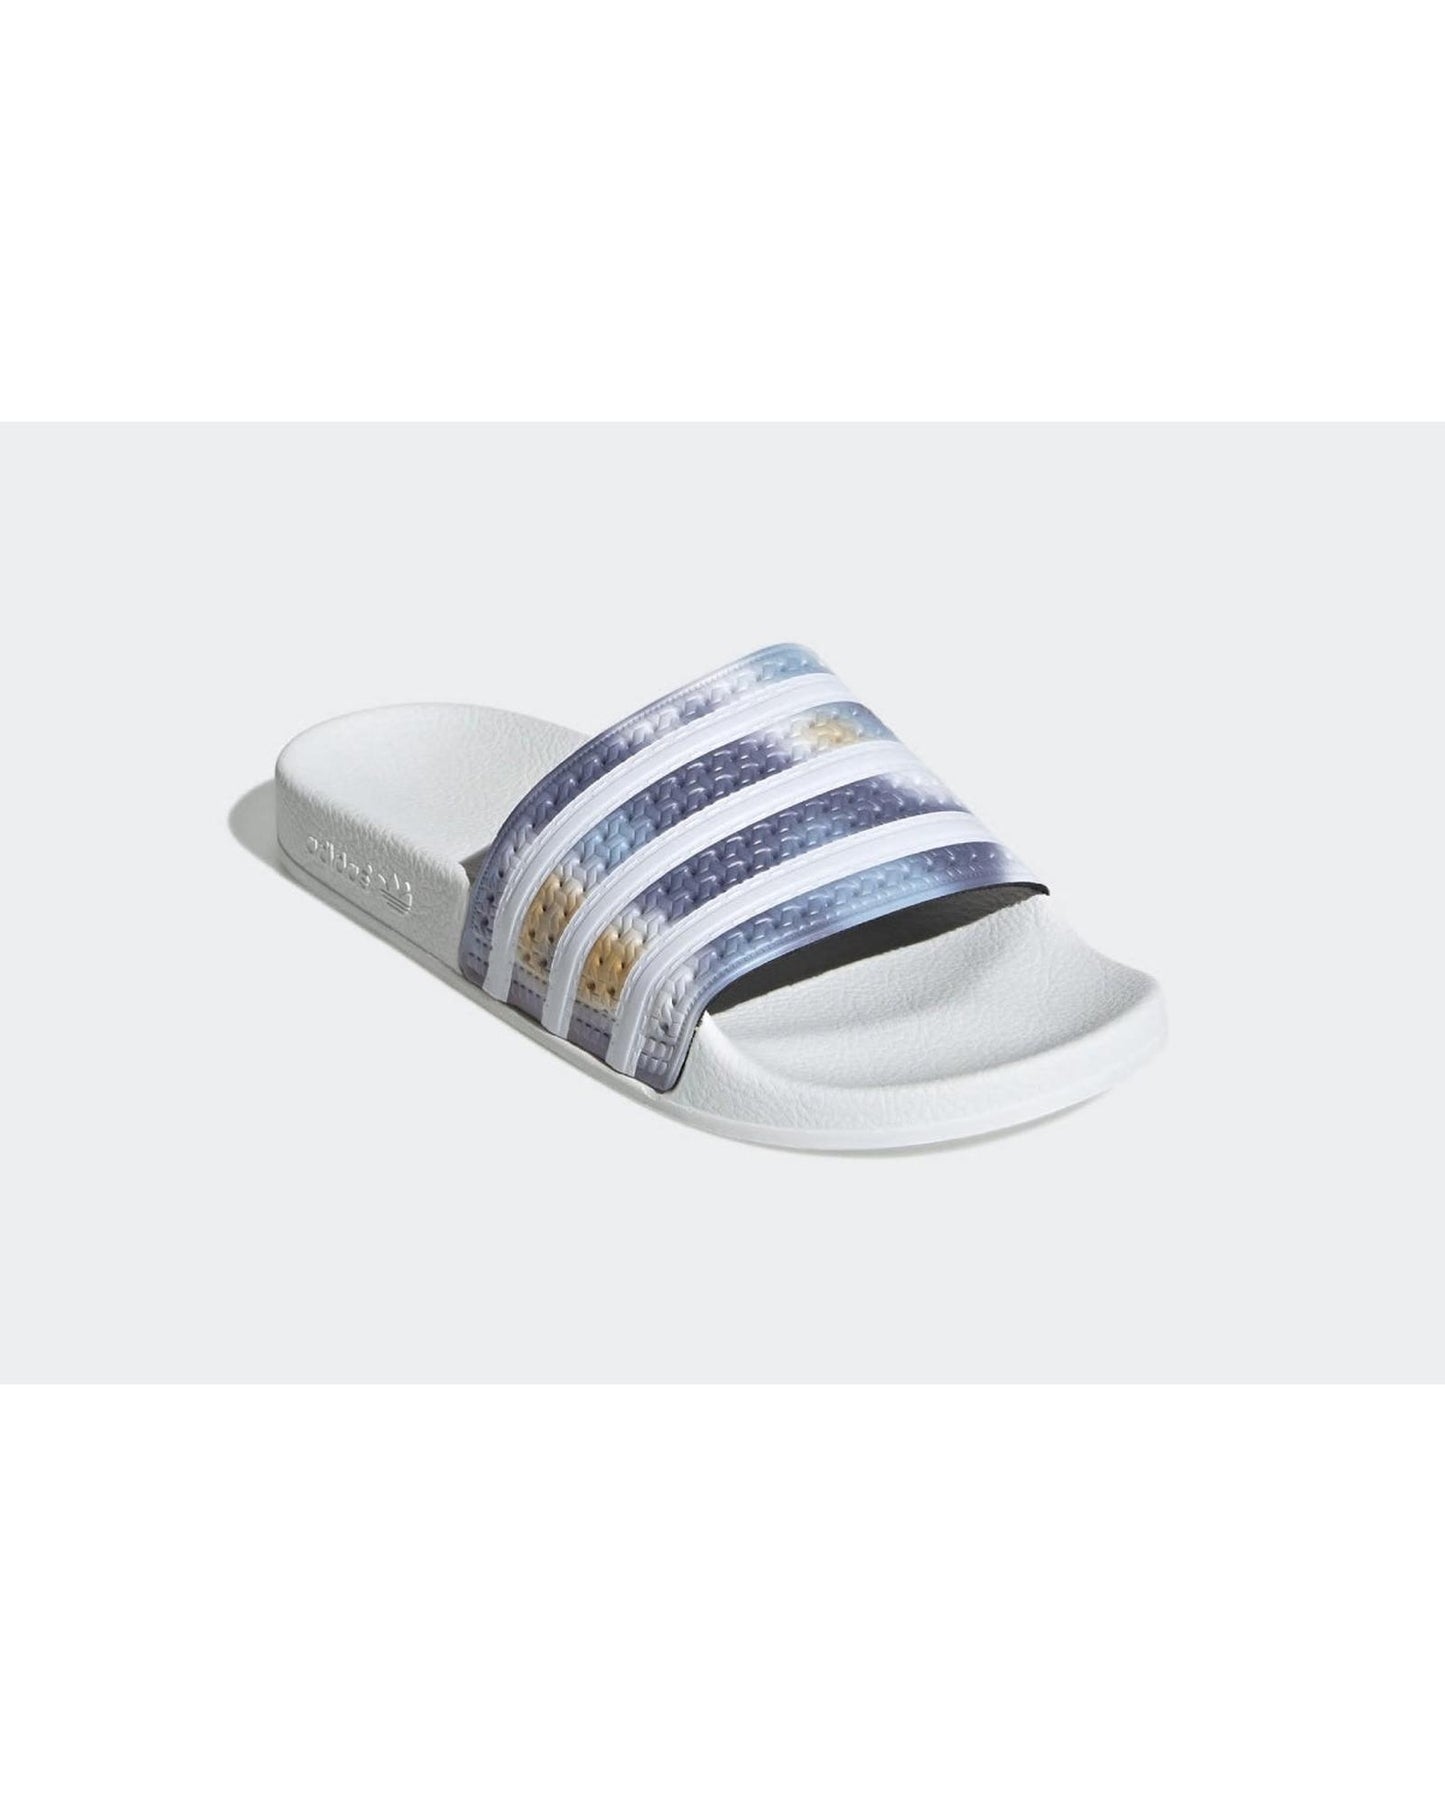 Synthetic Slip-on Slides with Textile Lining - 10 US